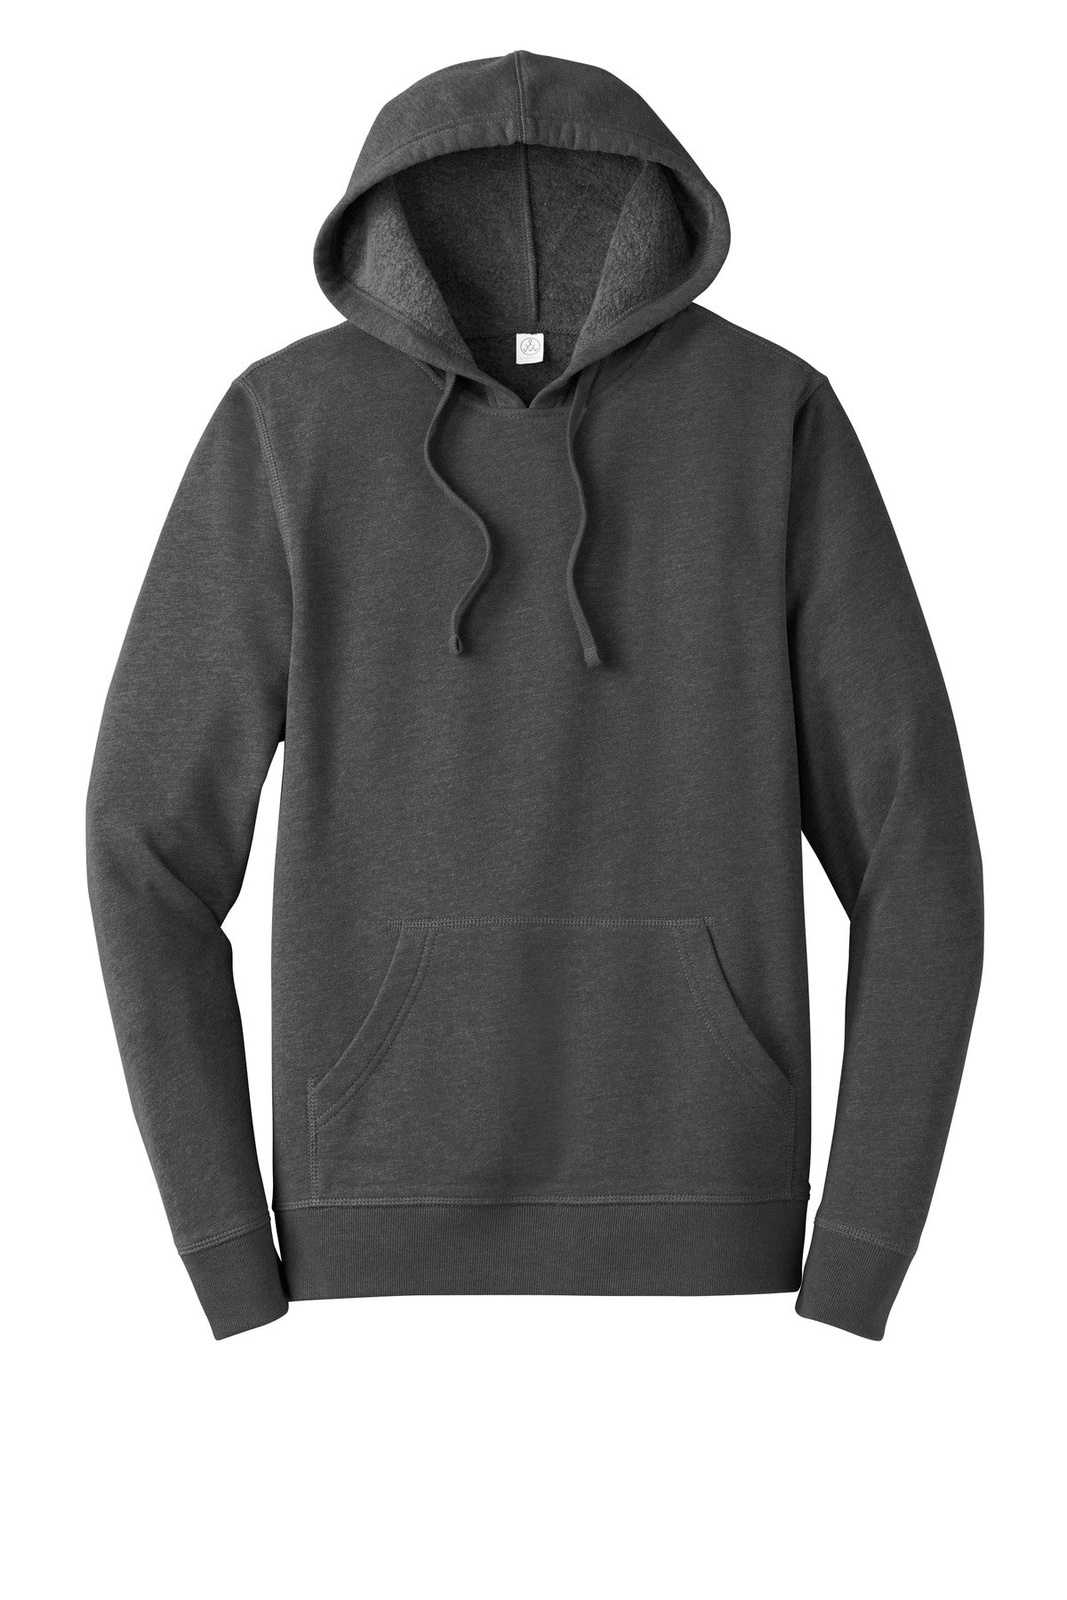 Alternative AA8051 Rider Blended Fleece Pullover Hoodie - Heather Deep Charcoal - HIT a Double - 5